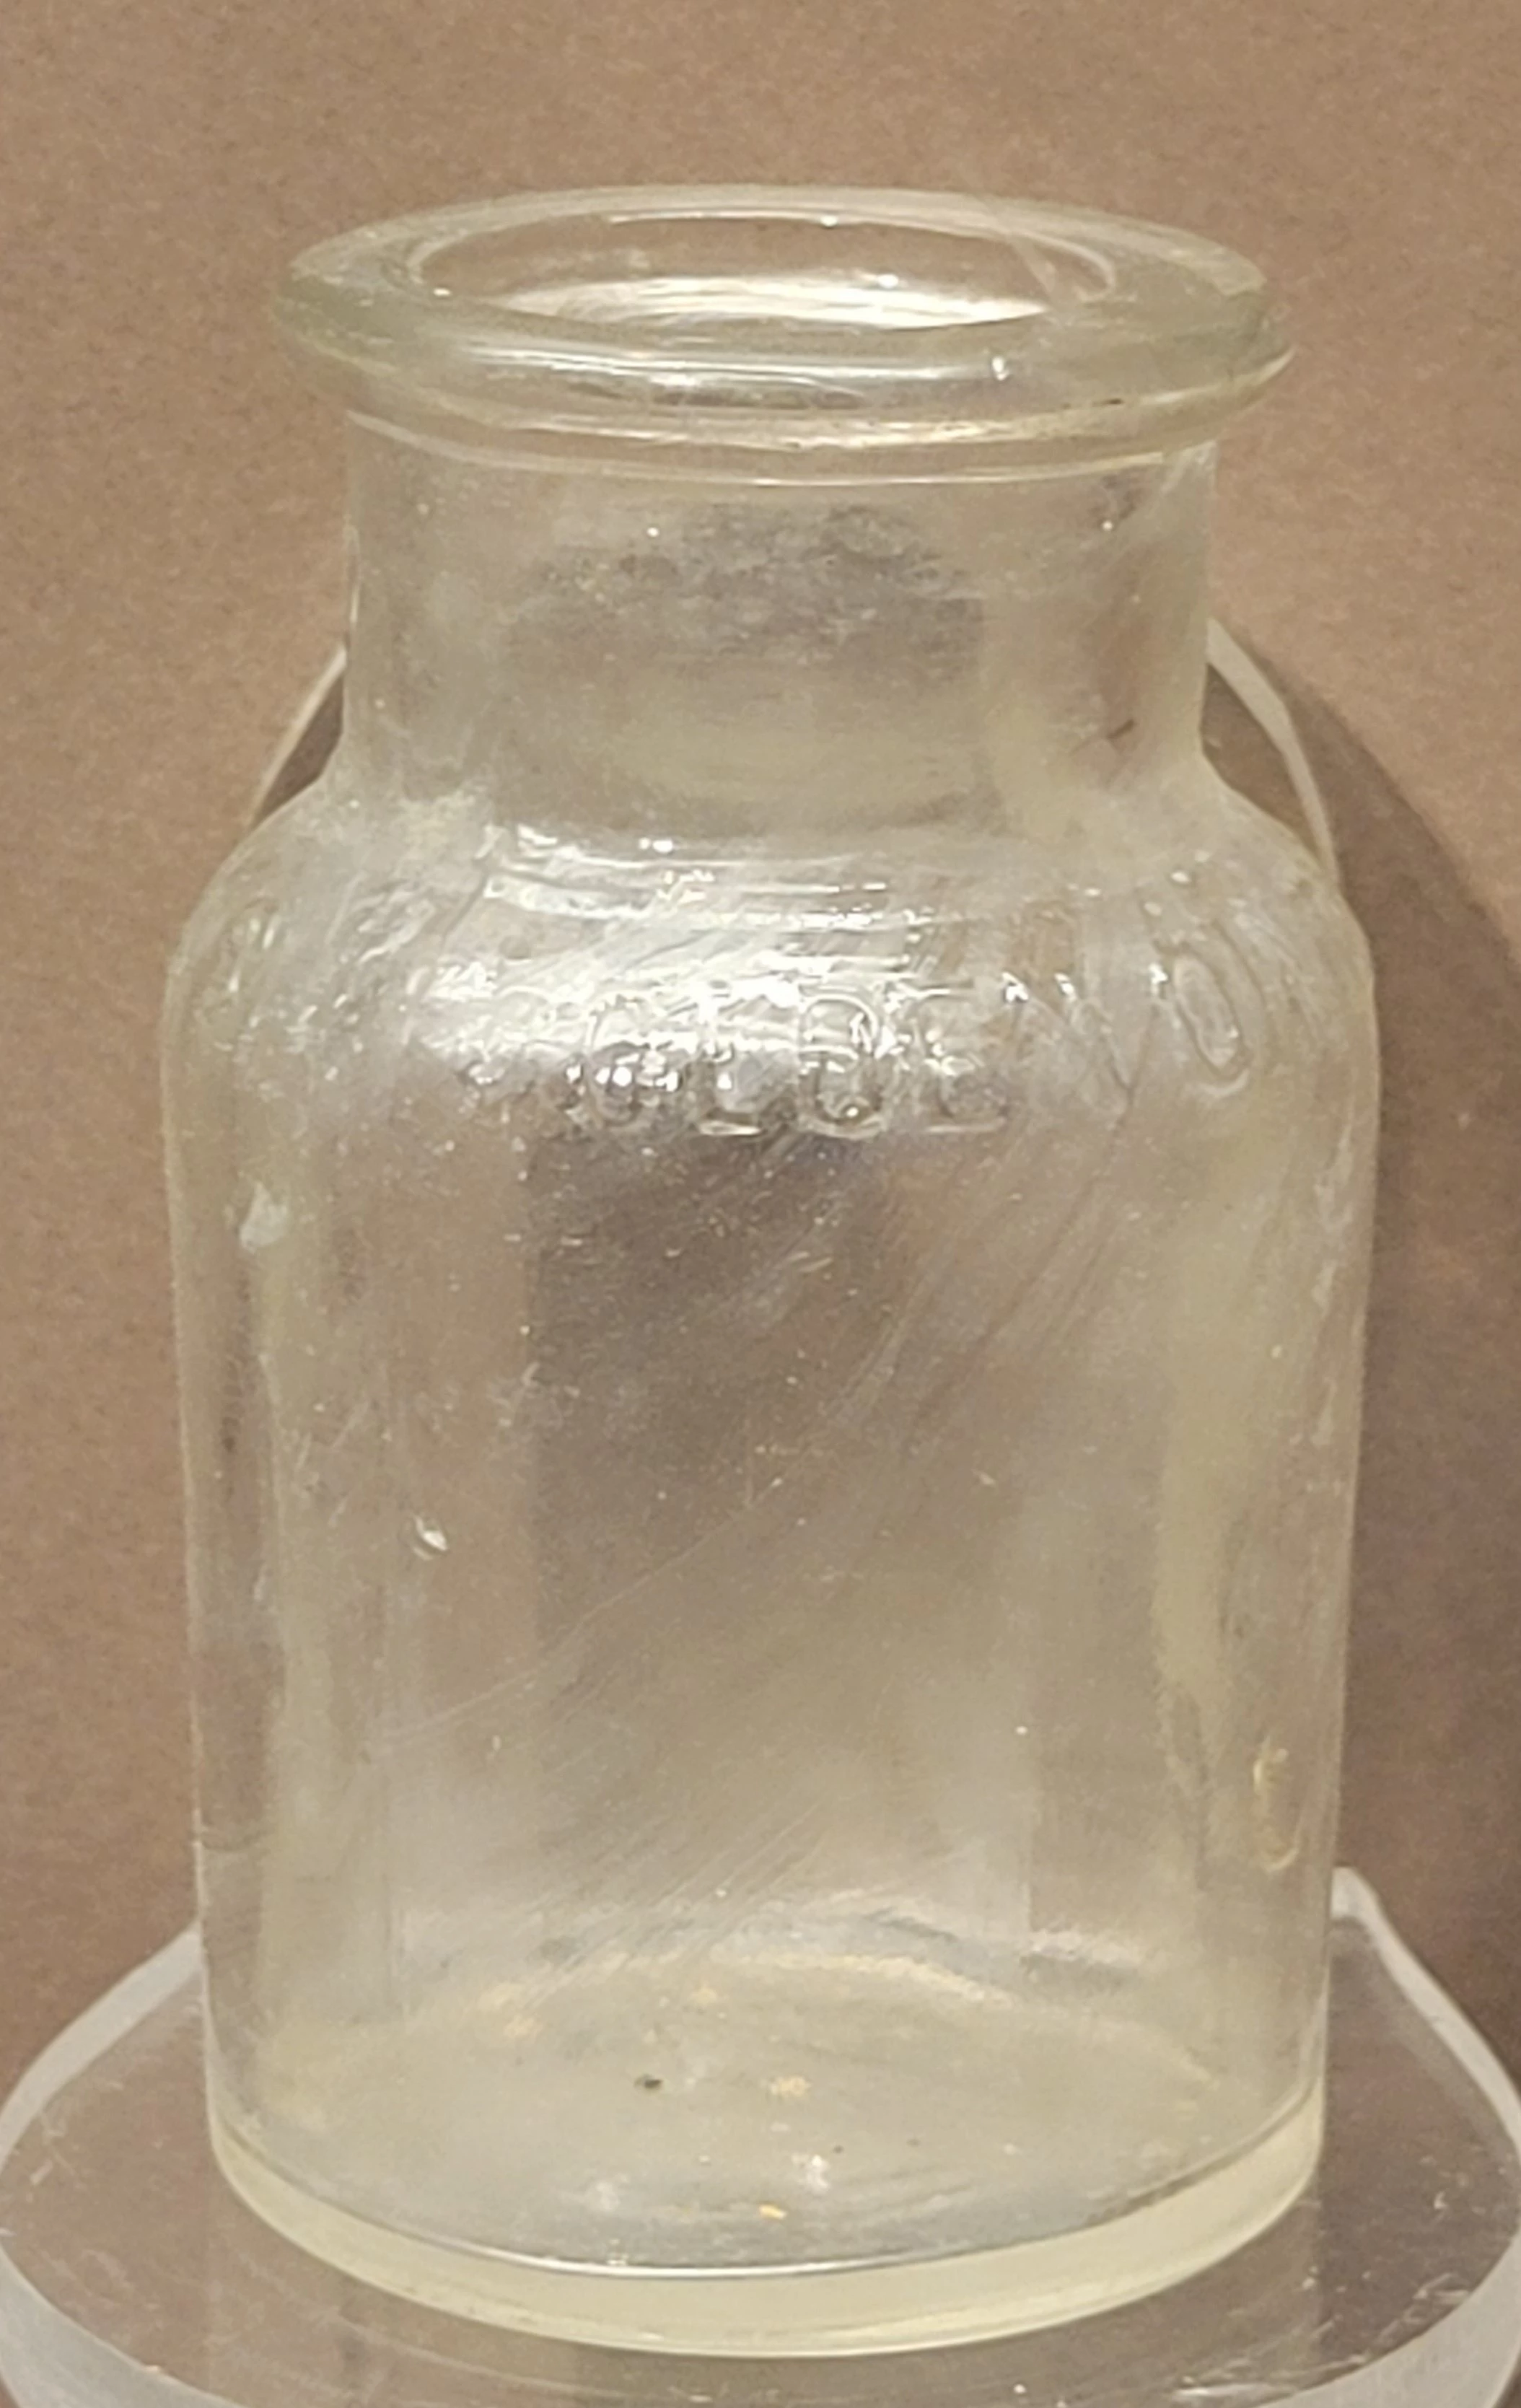 a clear glass bottle with a large opening on top. no label.